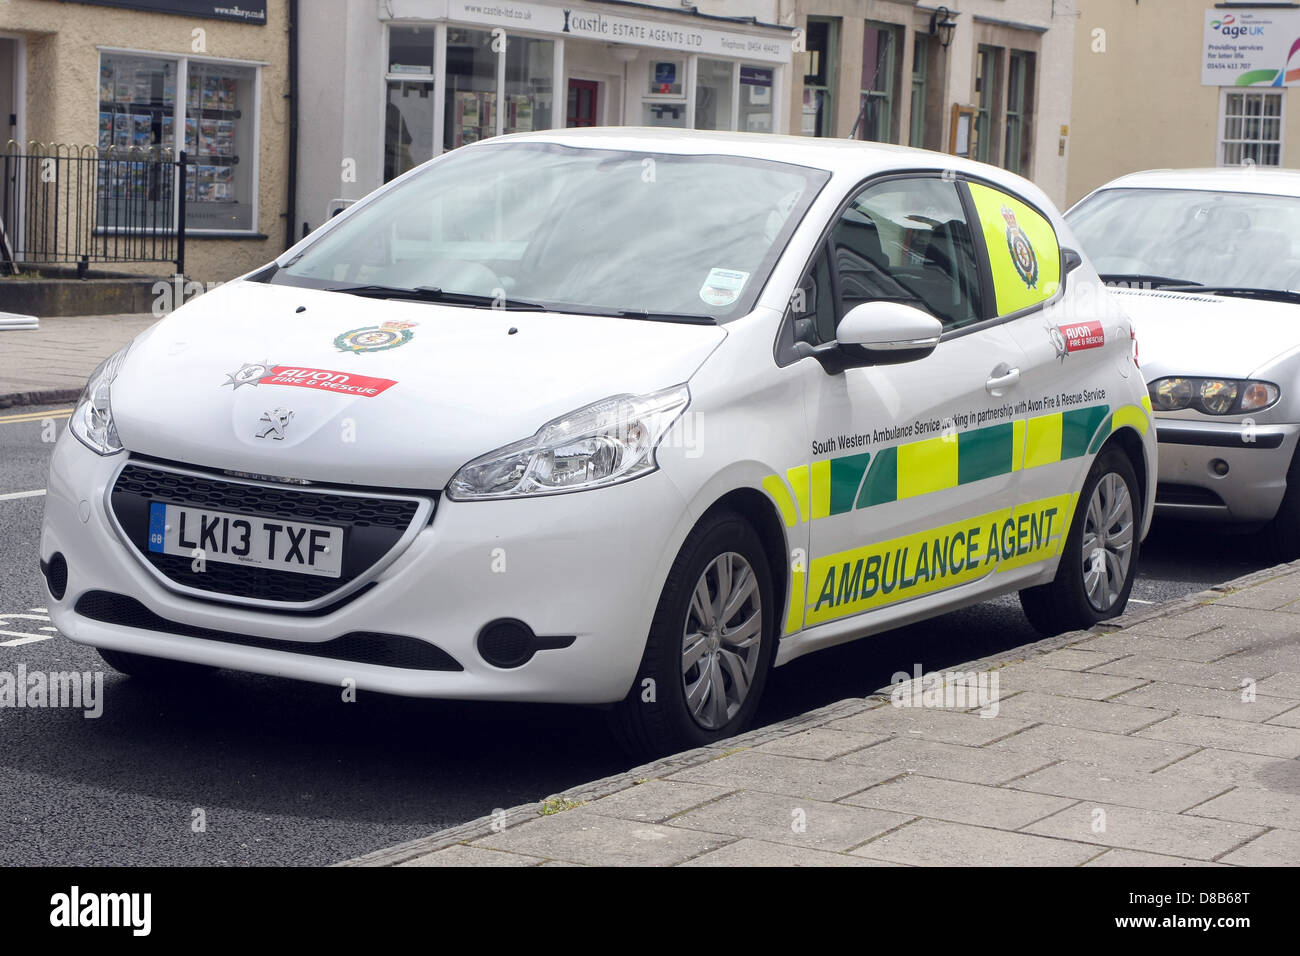 Ambulance agent car, used for coordination between Ambulance and fire services. May 2013 Stock Photo